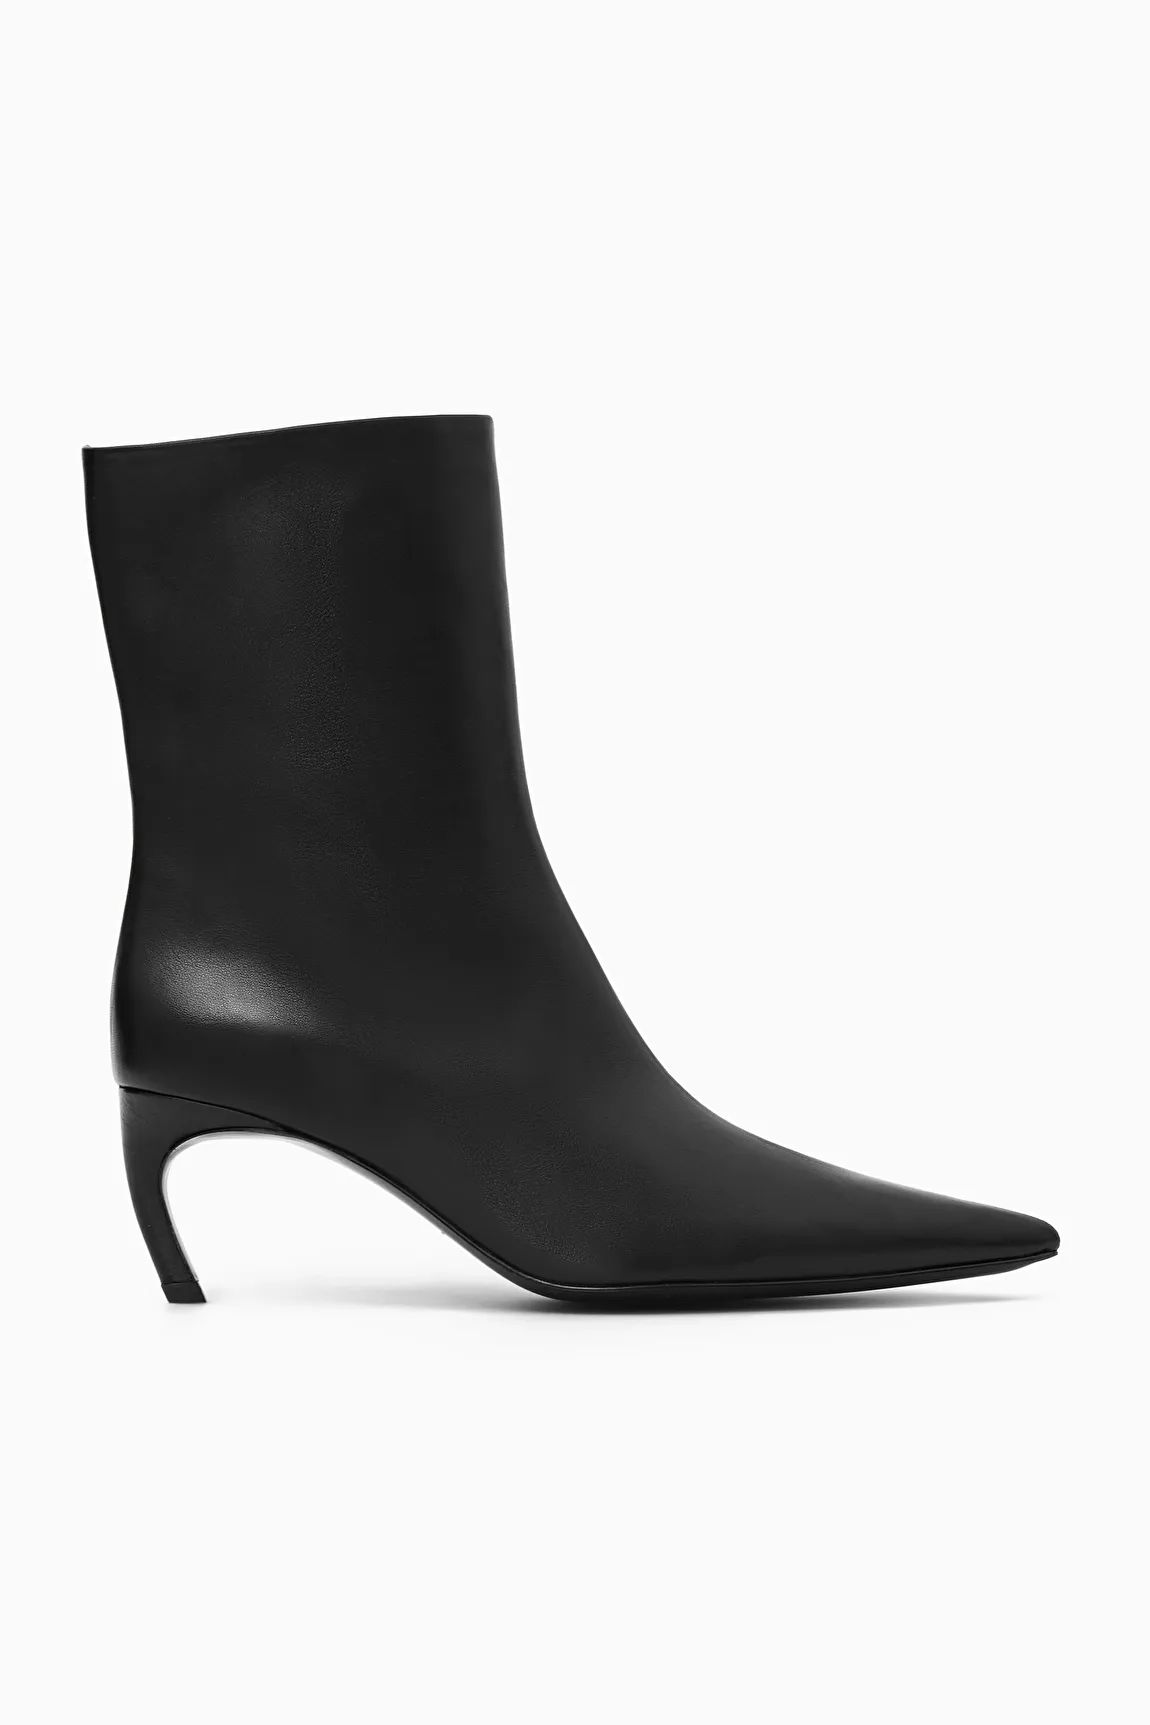 POINTED KITTEN-HEEL LEATHER BOOTS - BLACK - COS | COS UK